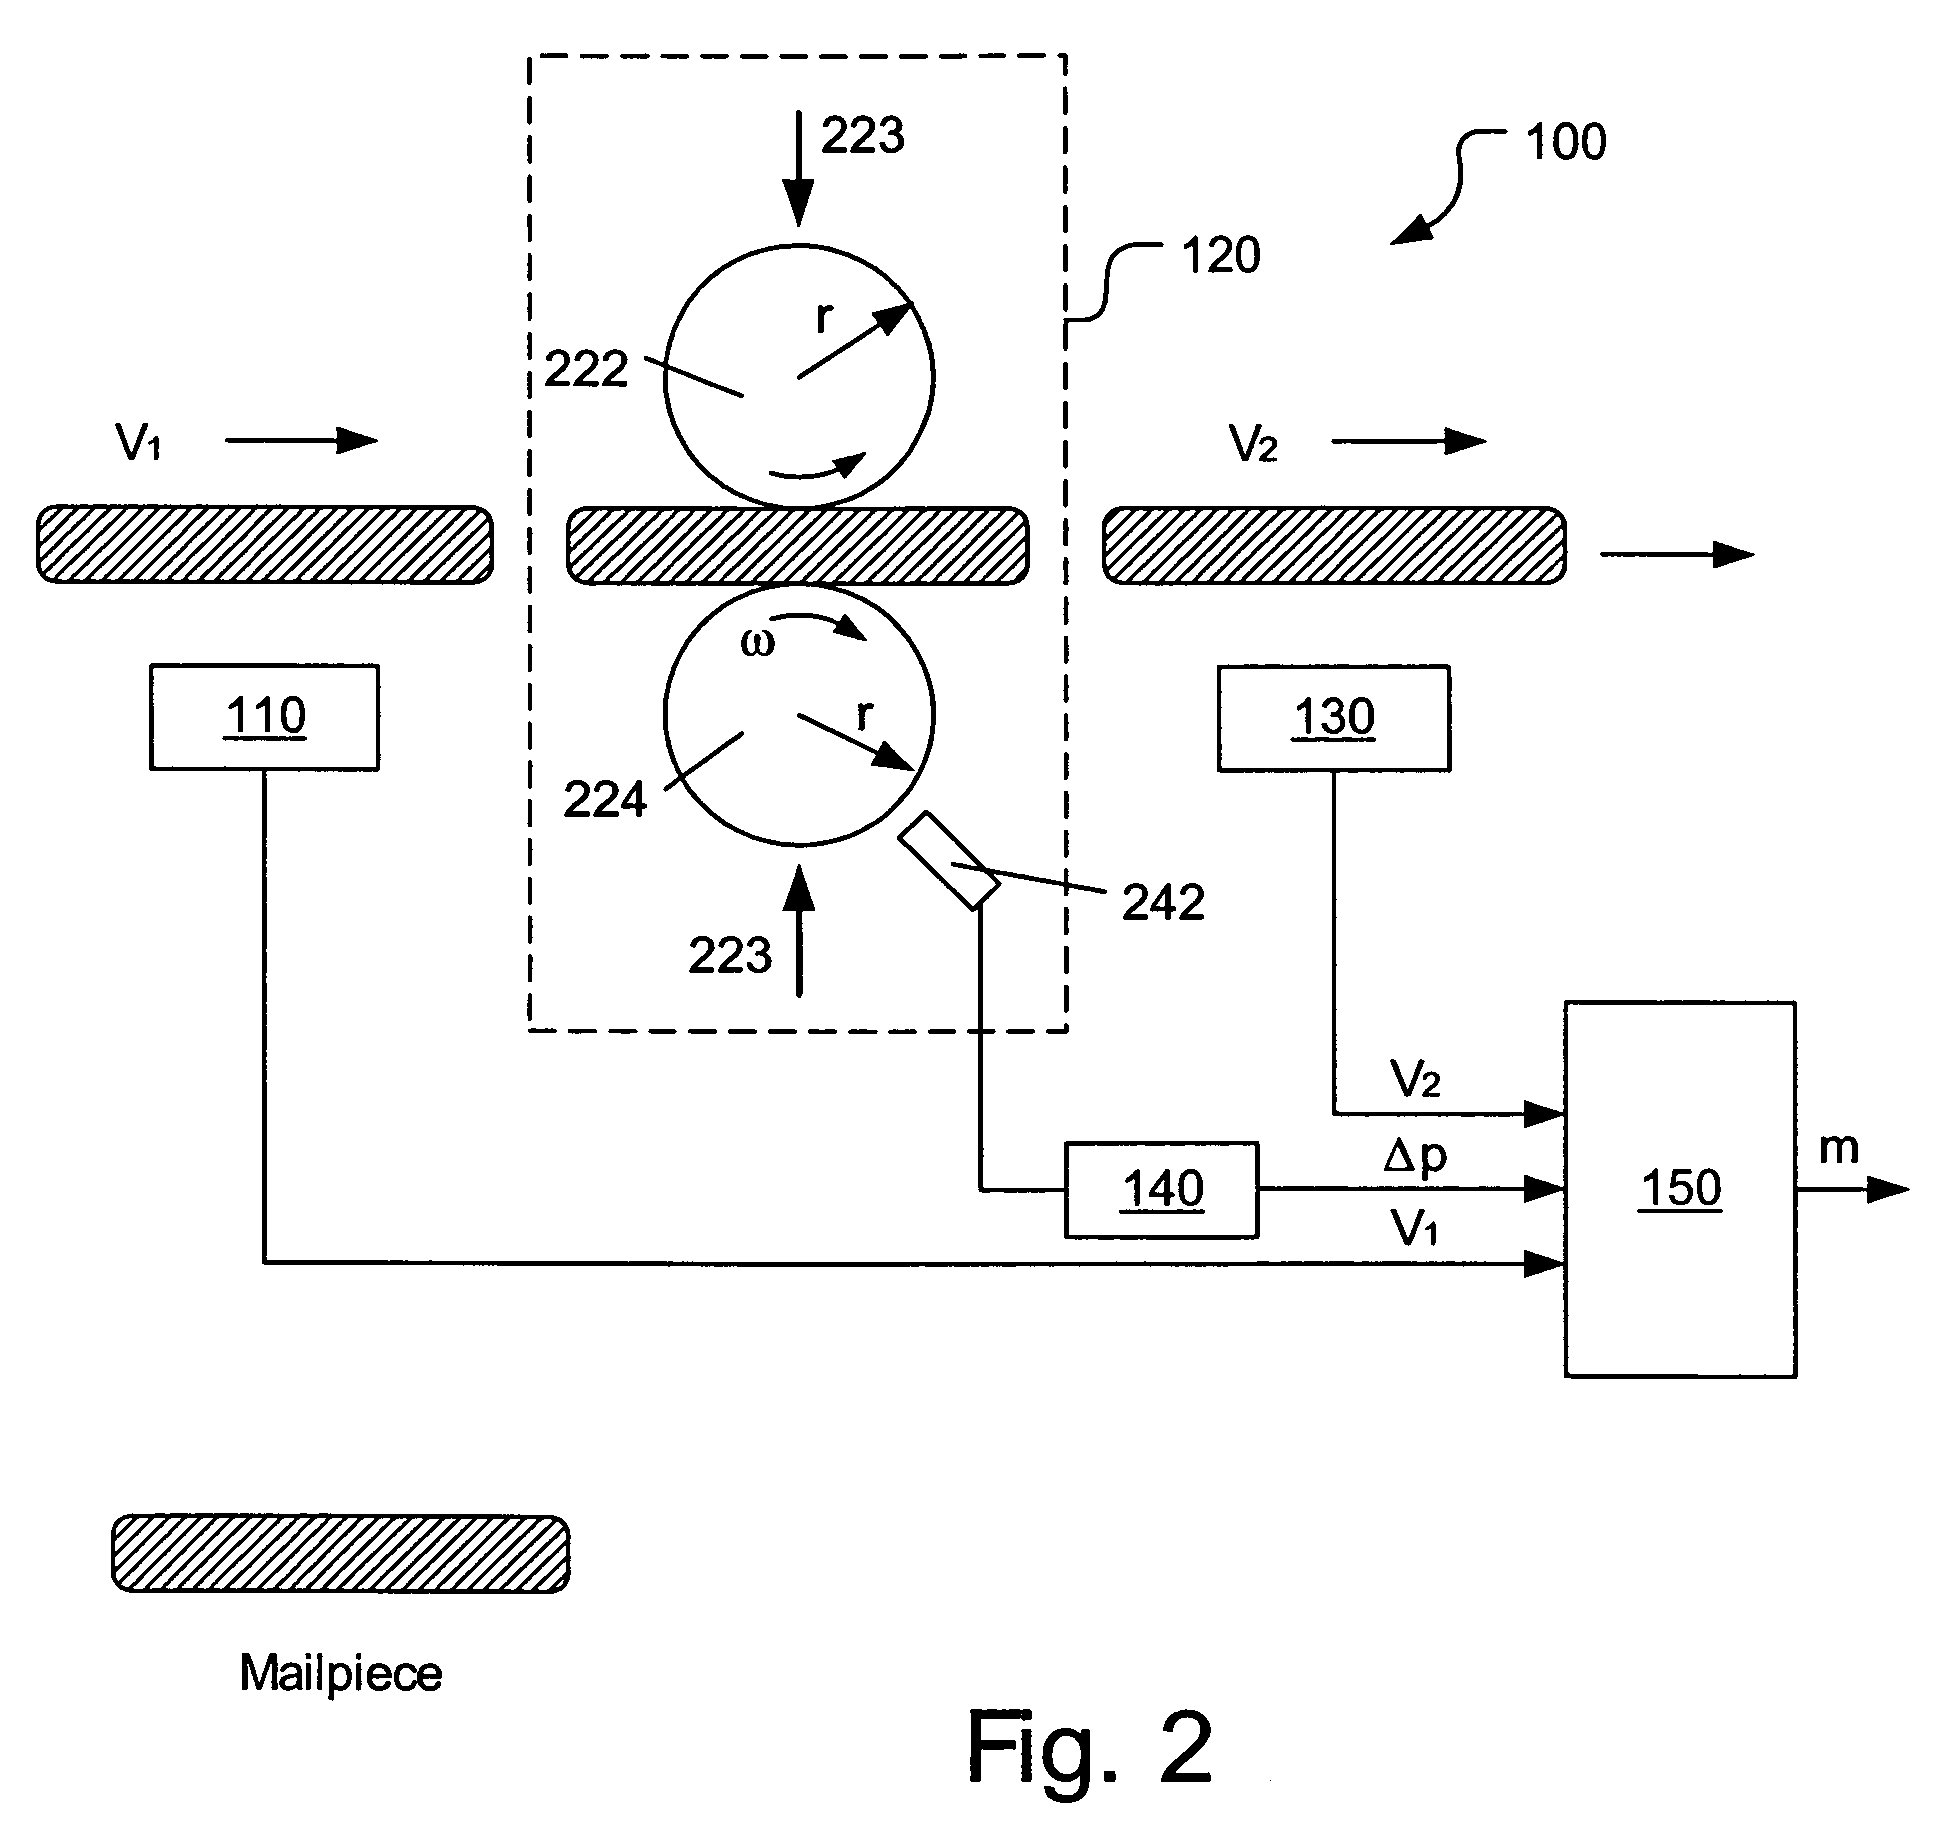 Method and apparatus for determining weight of moving mailpieces